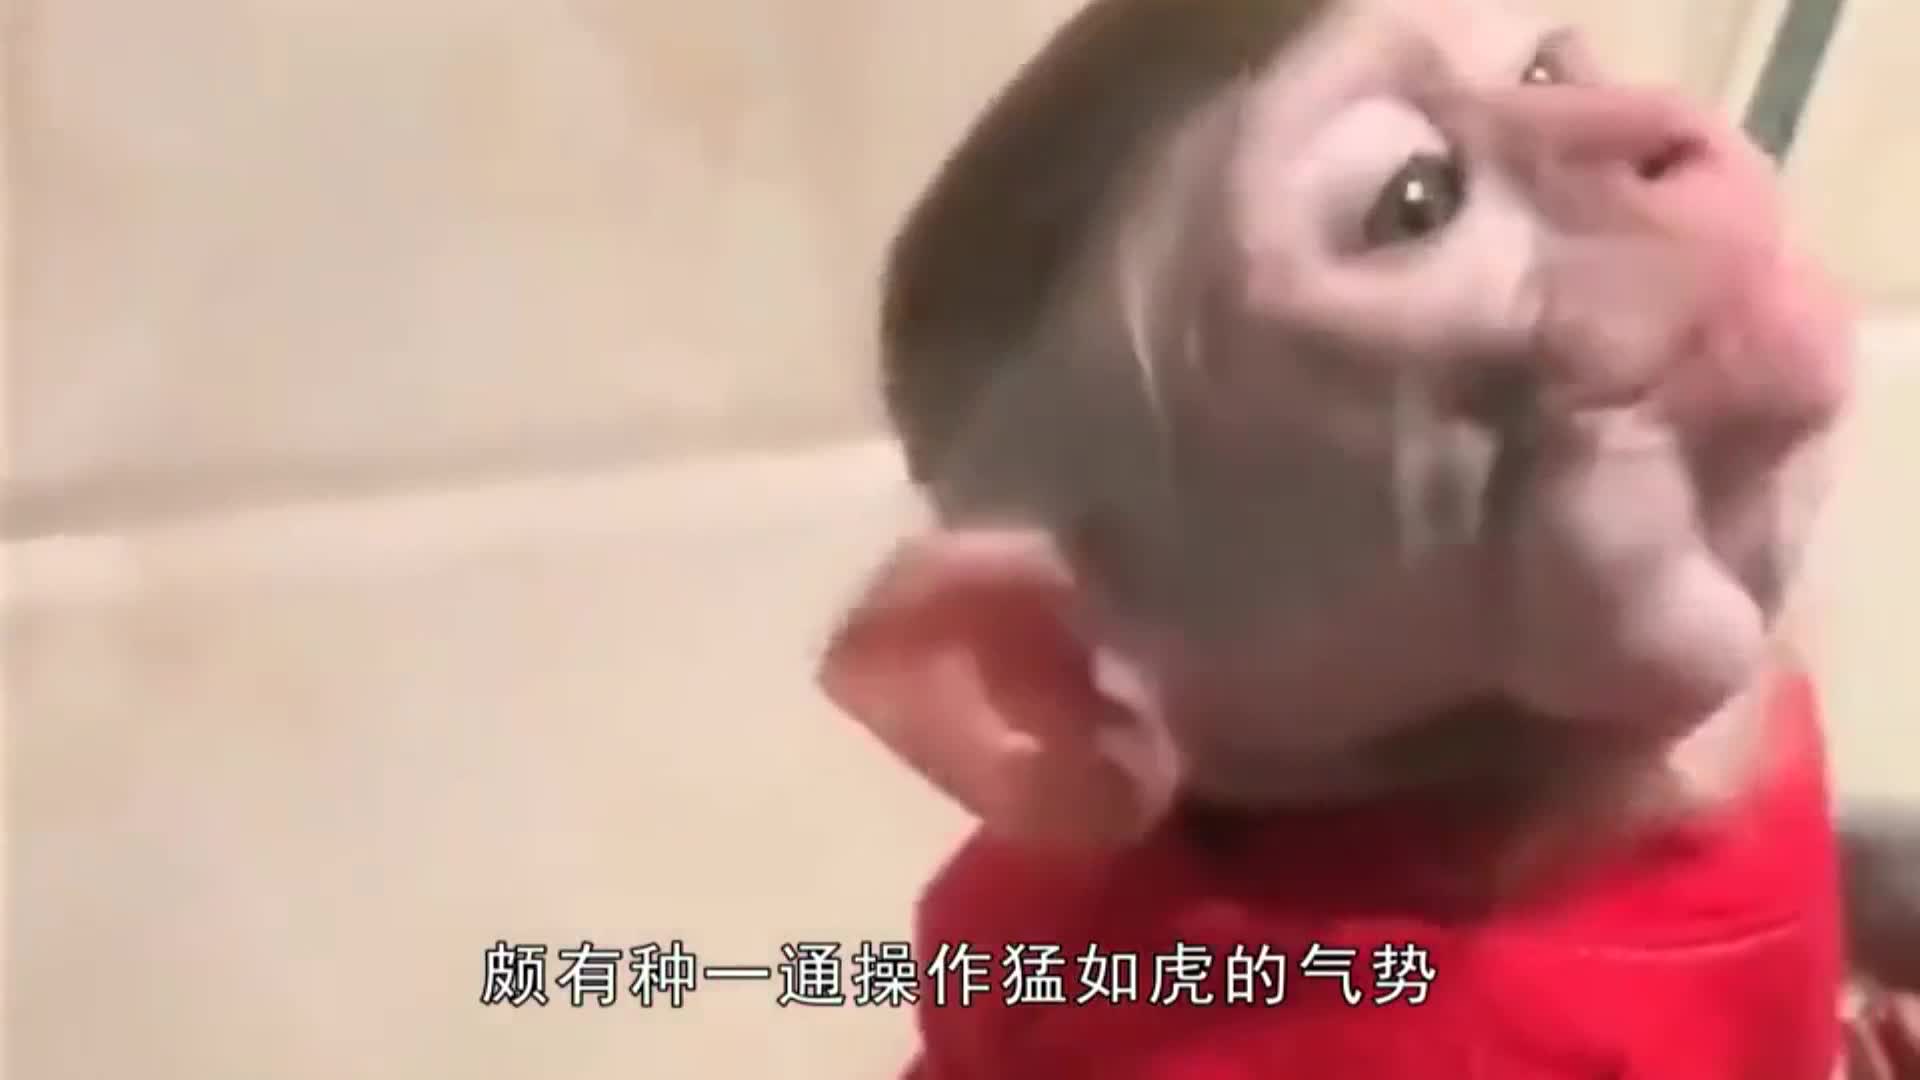 What does a monkey look like after being shaved? After the test, the foreigner sighed: the bear child next door